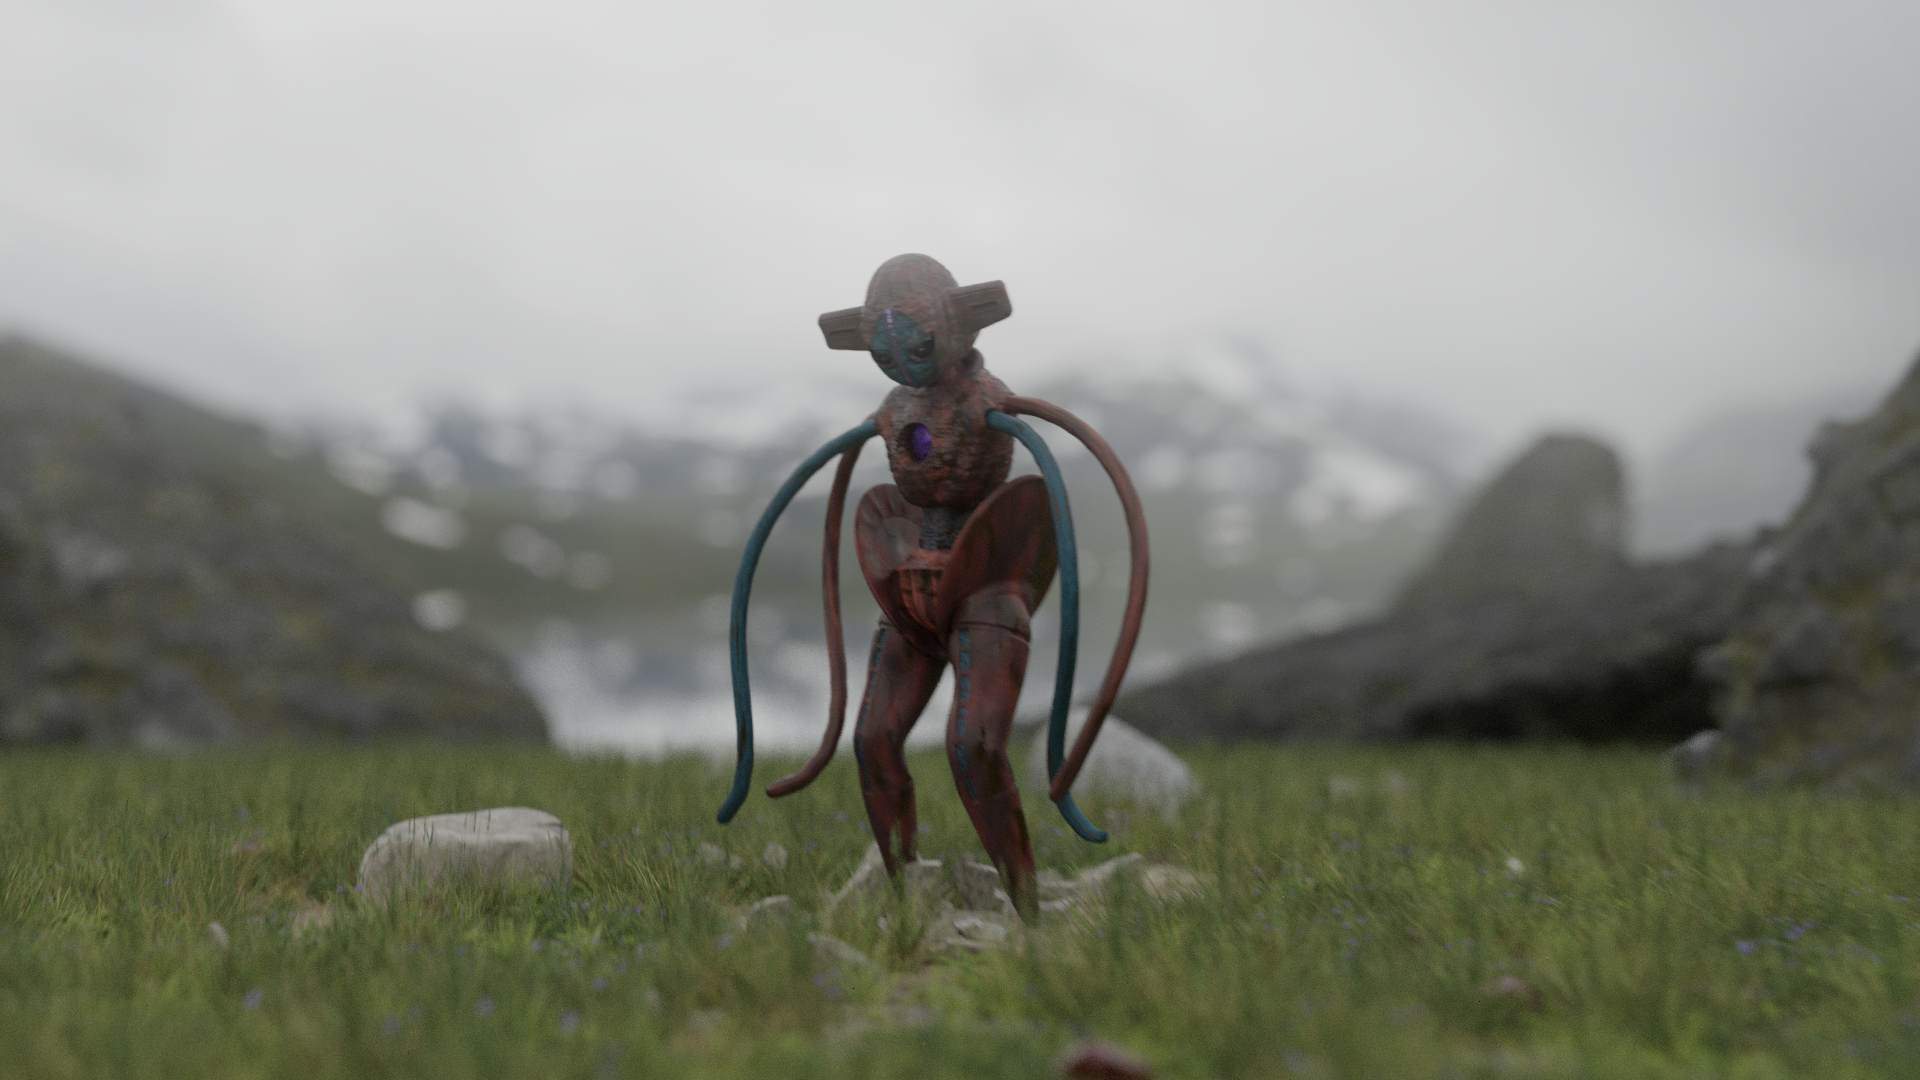 A 3D animated rendering of a Deoxys Pokémon standing in a field